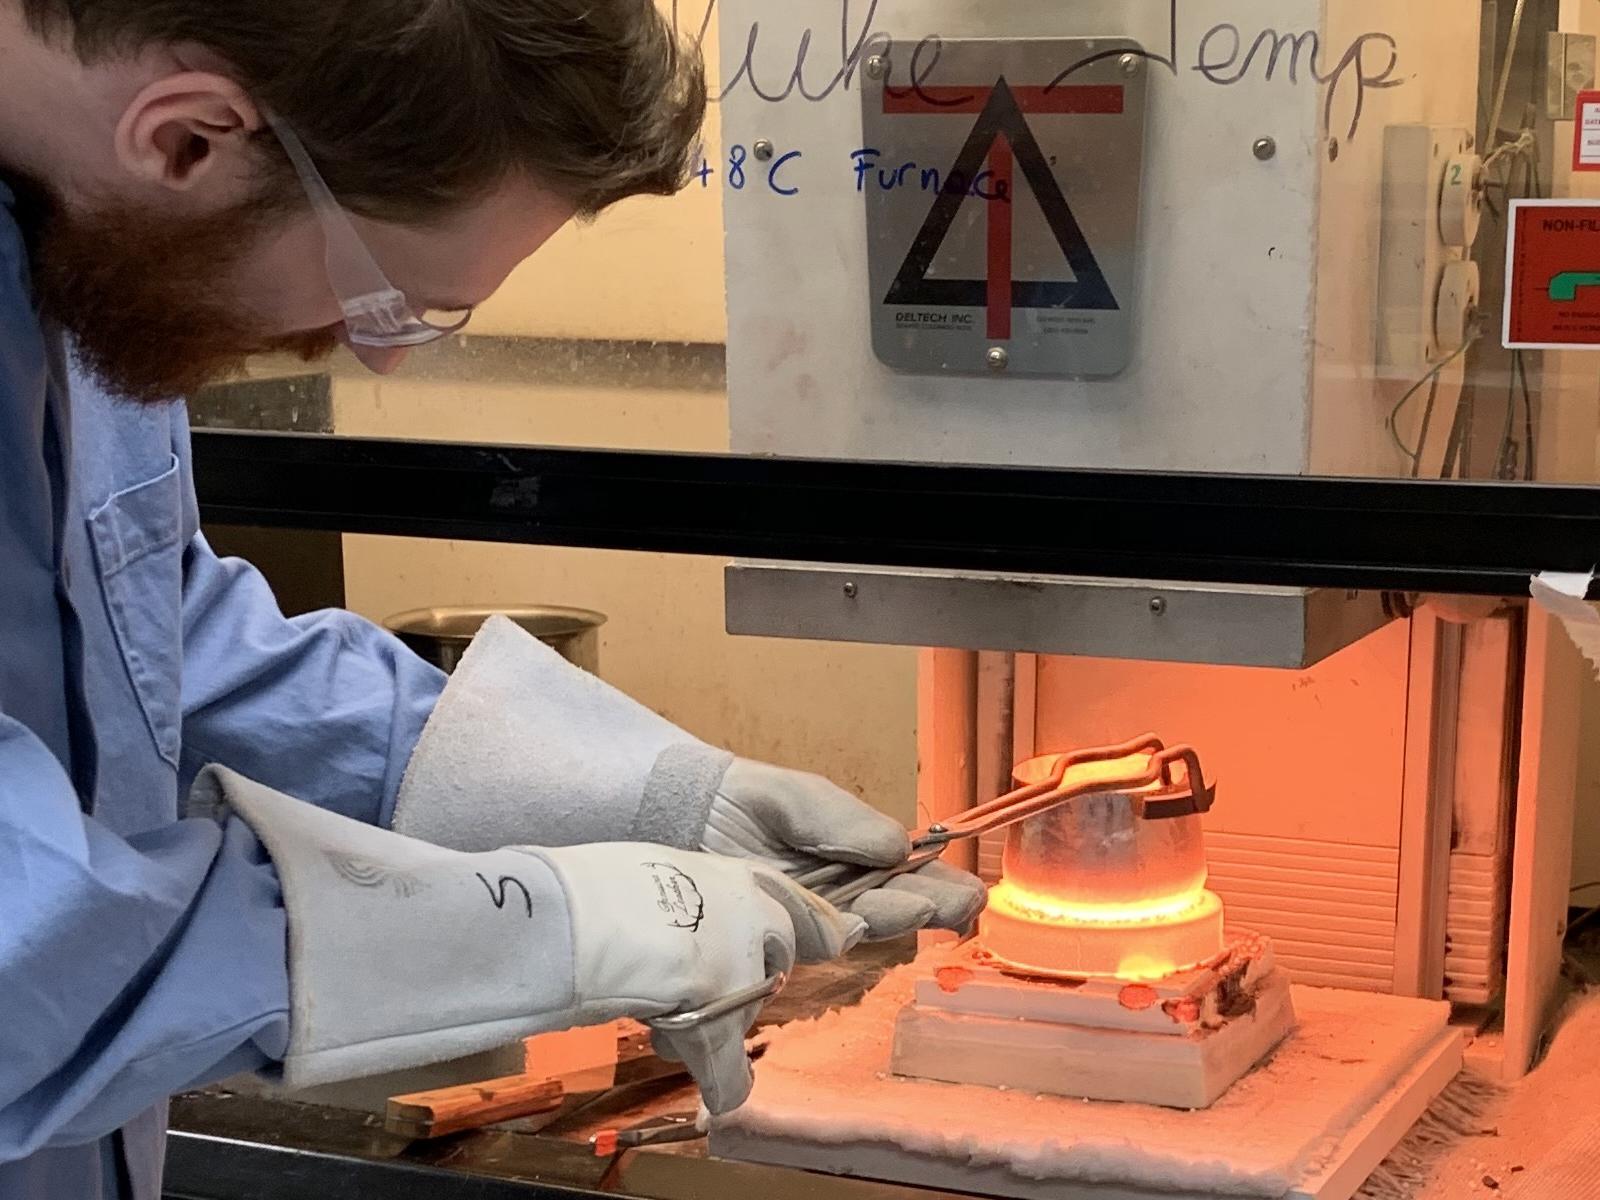 Male researcher wearing thermal gloves uses forceps to grab a crucible of melted glass